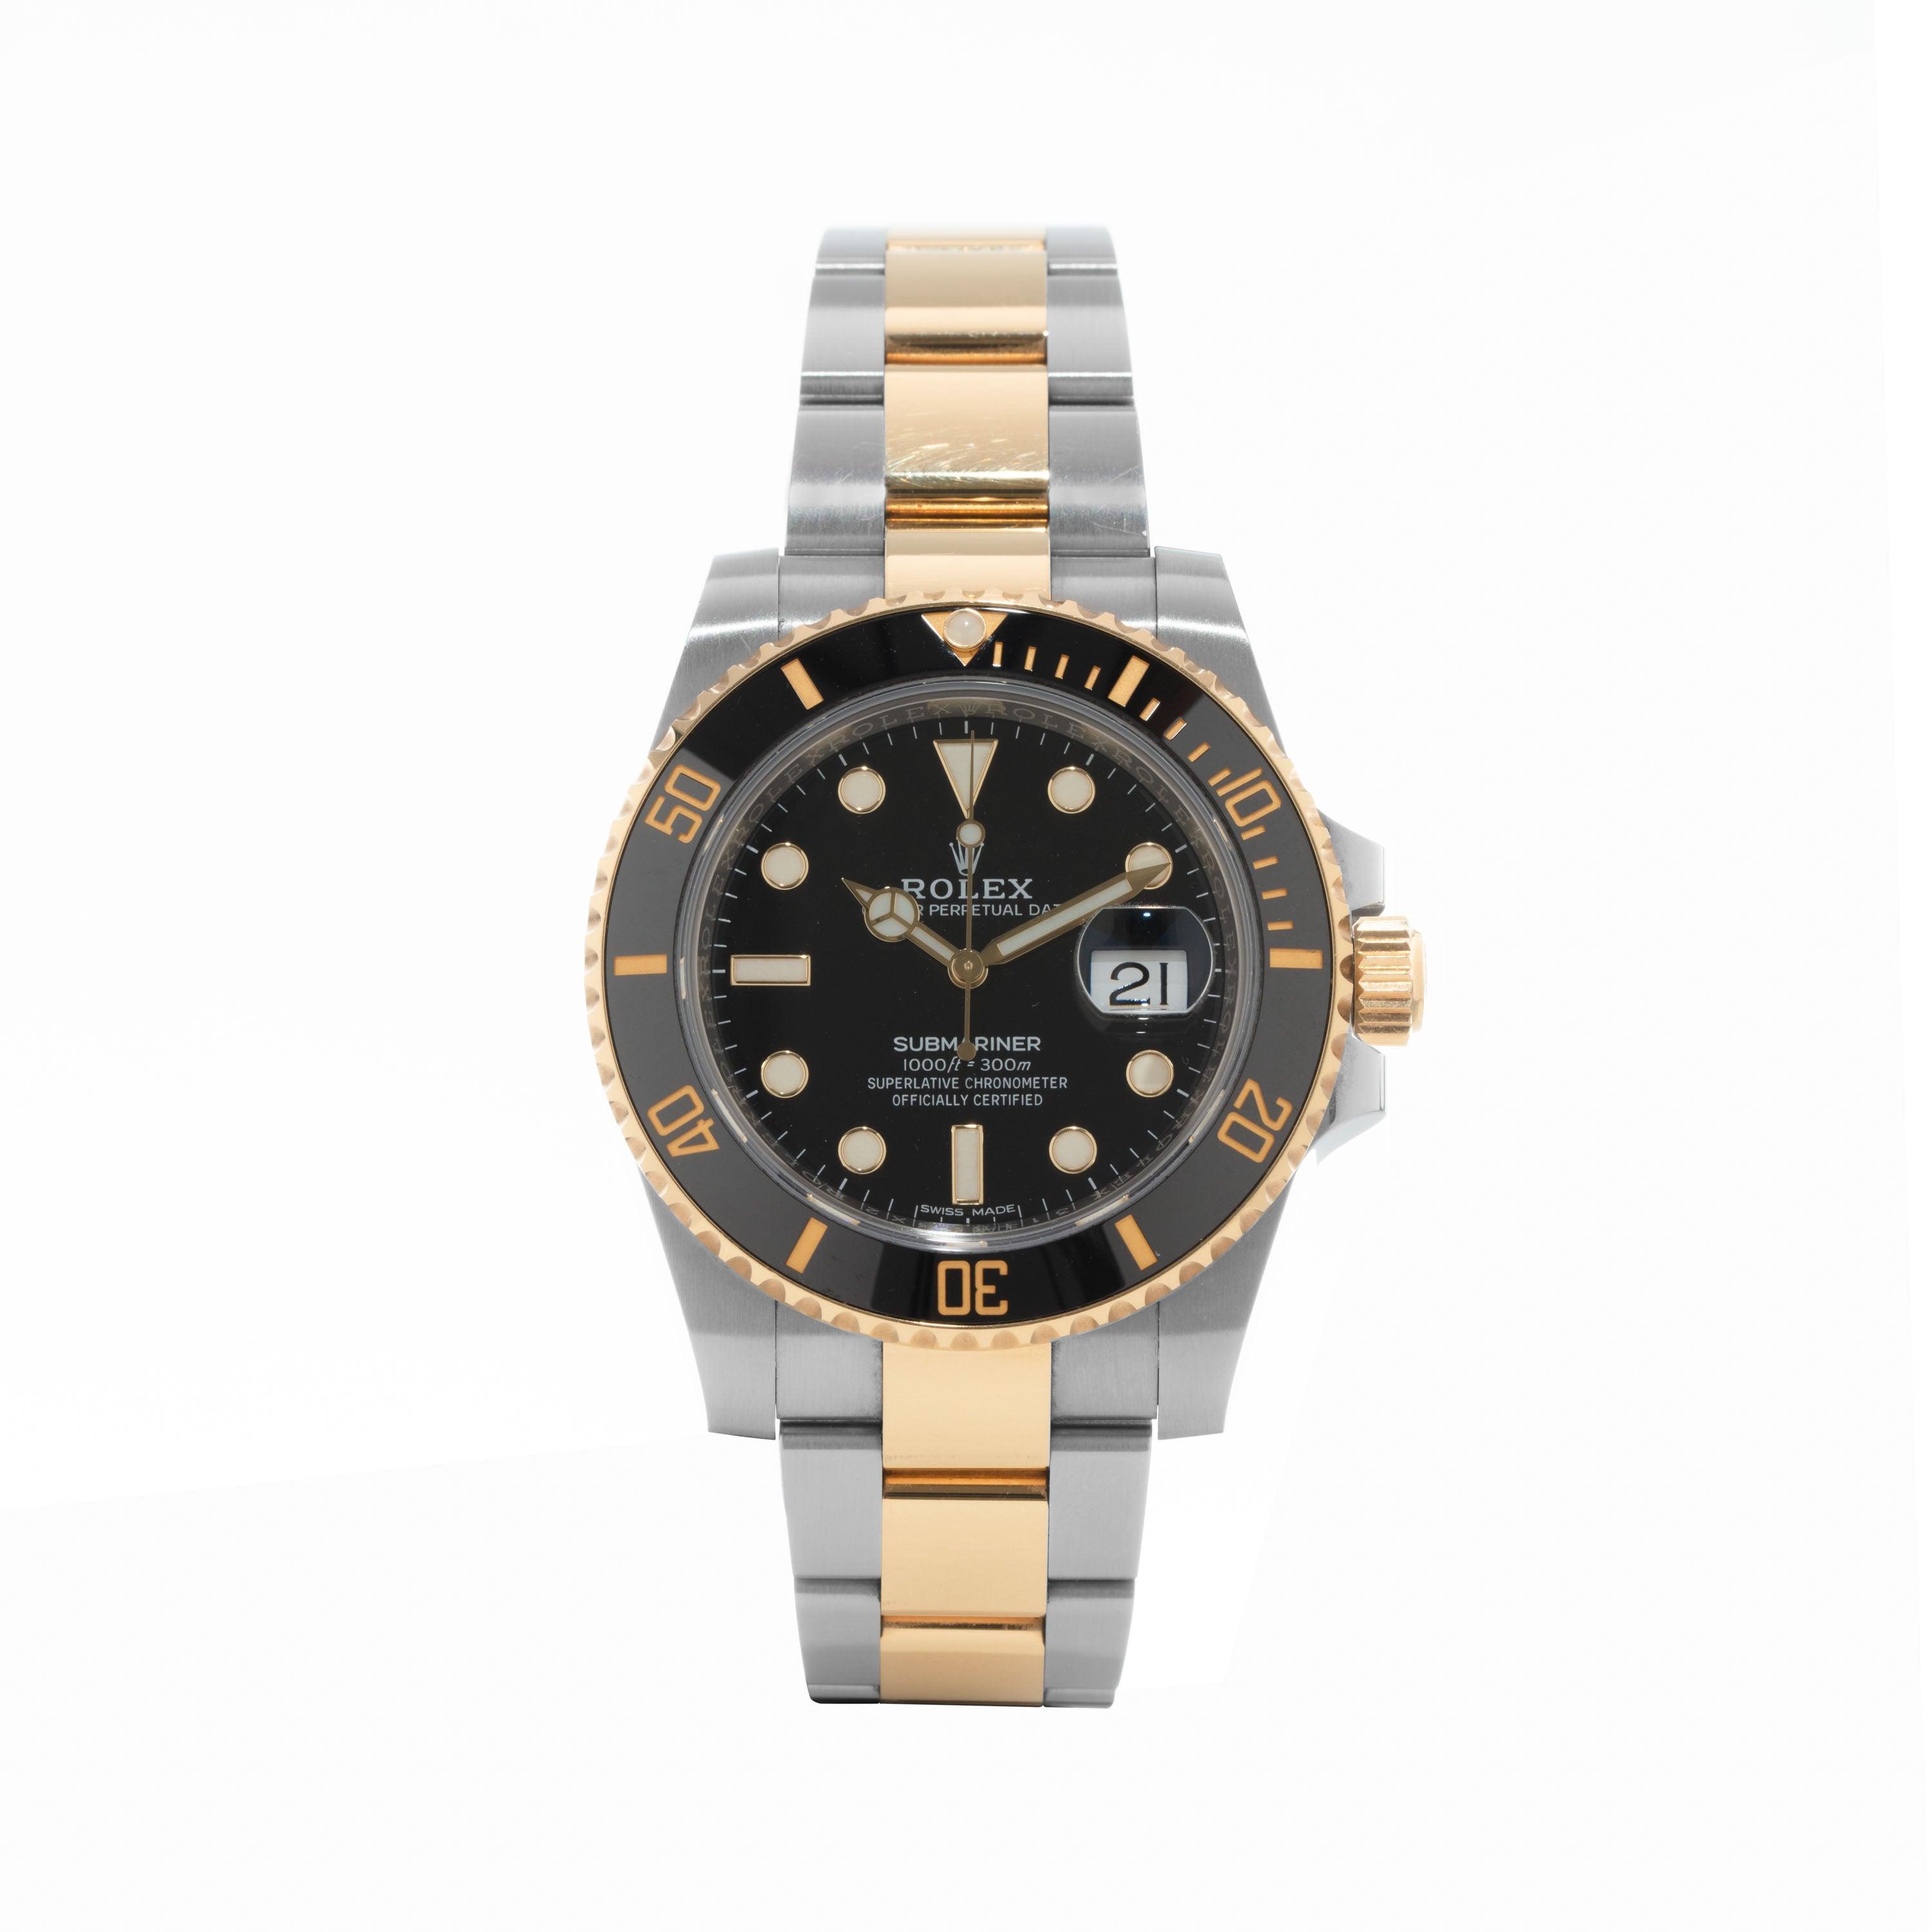 Rolex Submariner Review, Expert Buyers Guide, & Pricing